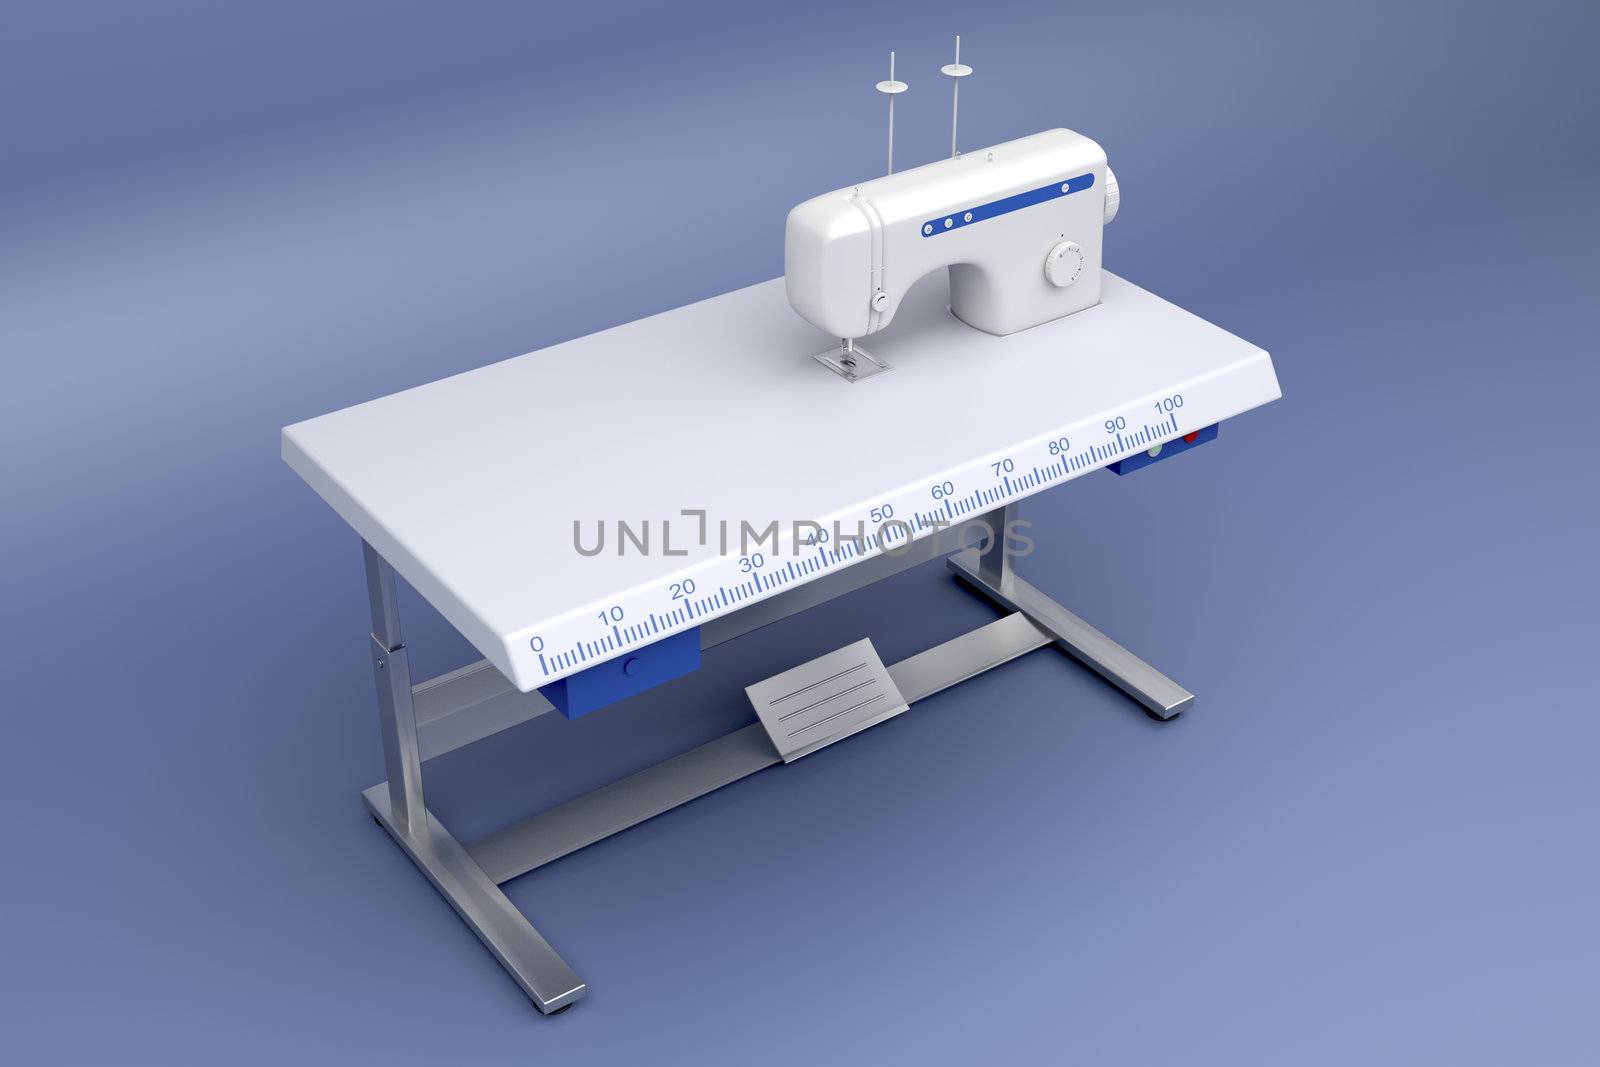 3d illustration of industrial sewing machine on blue background